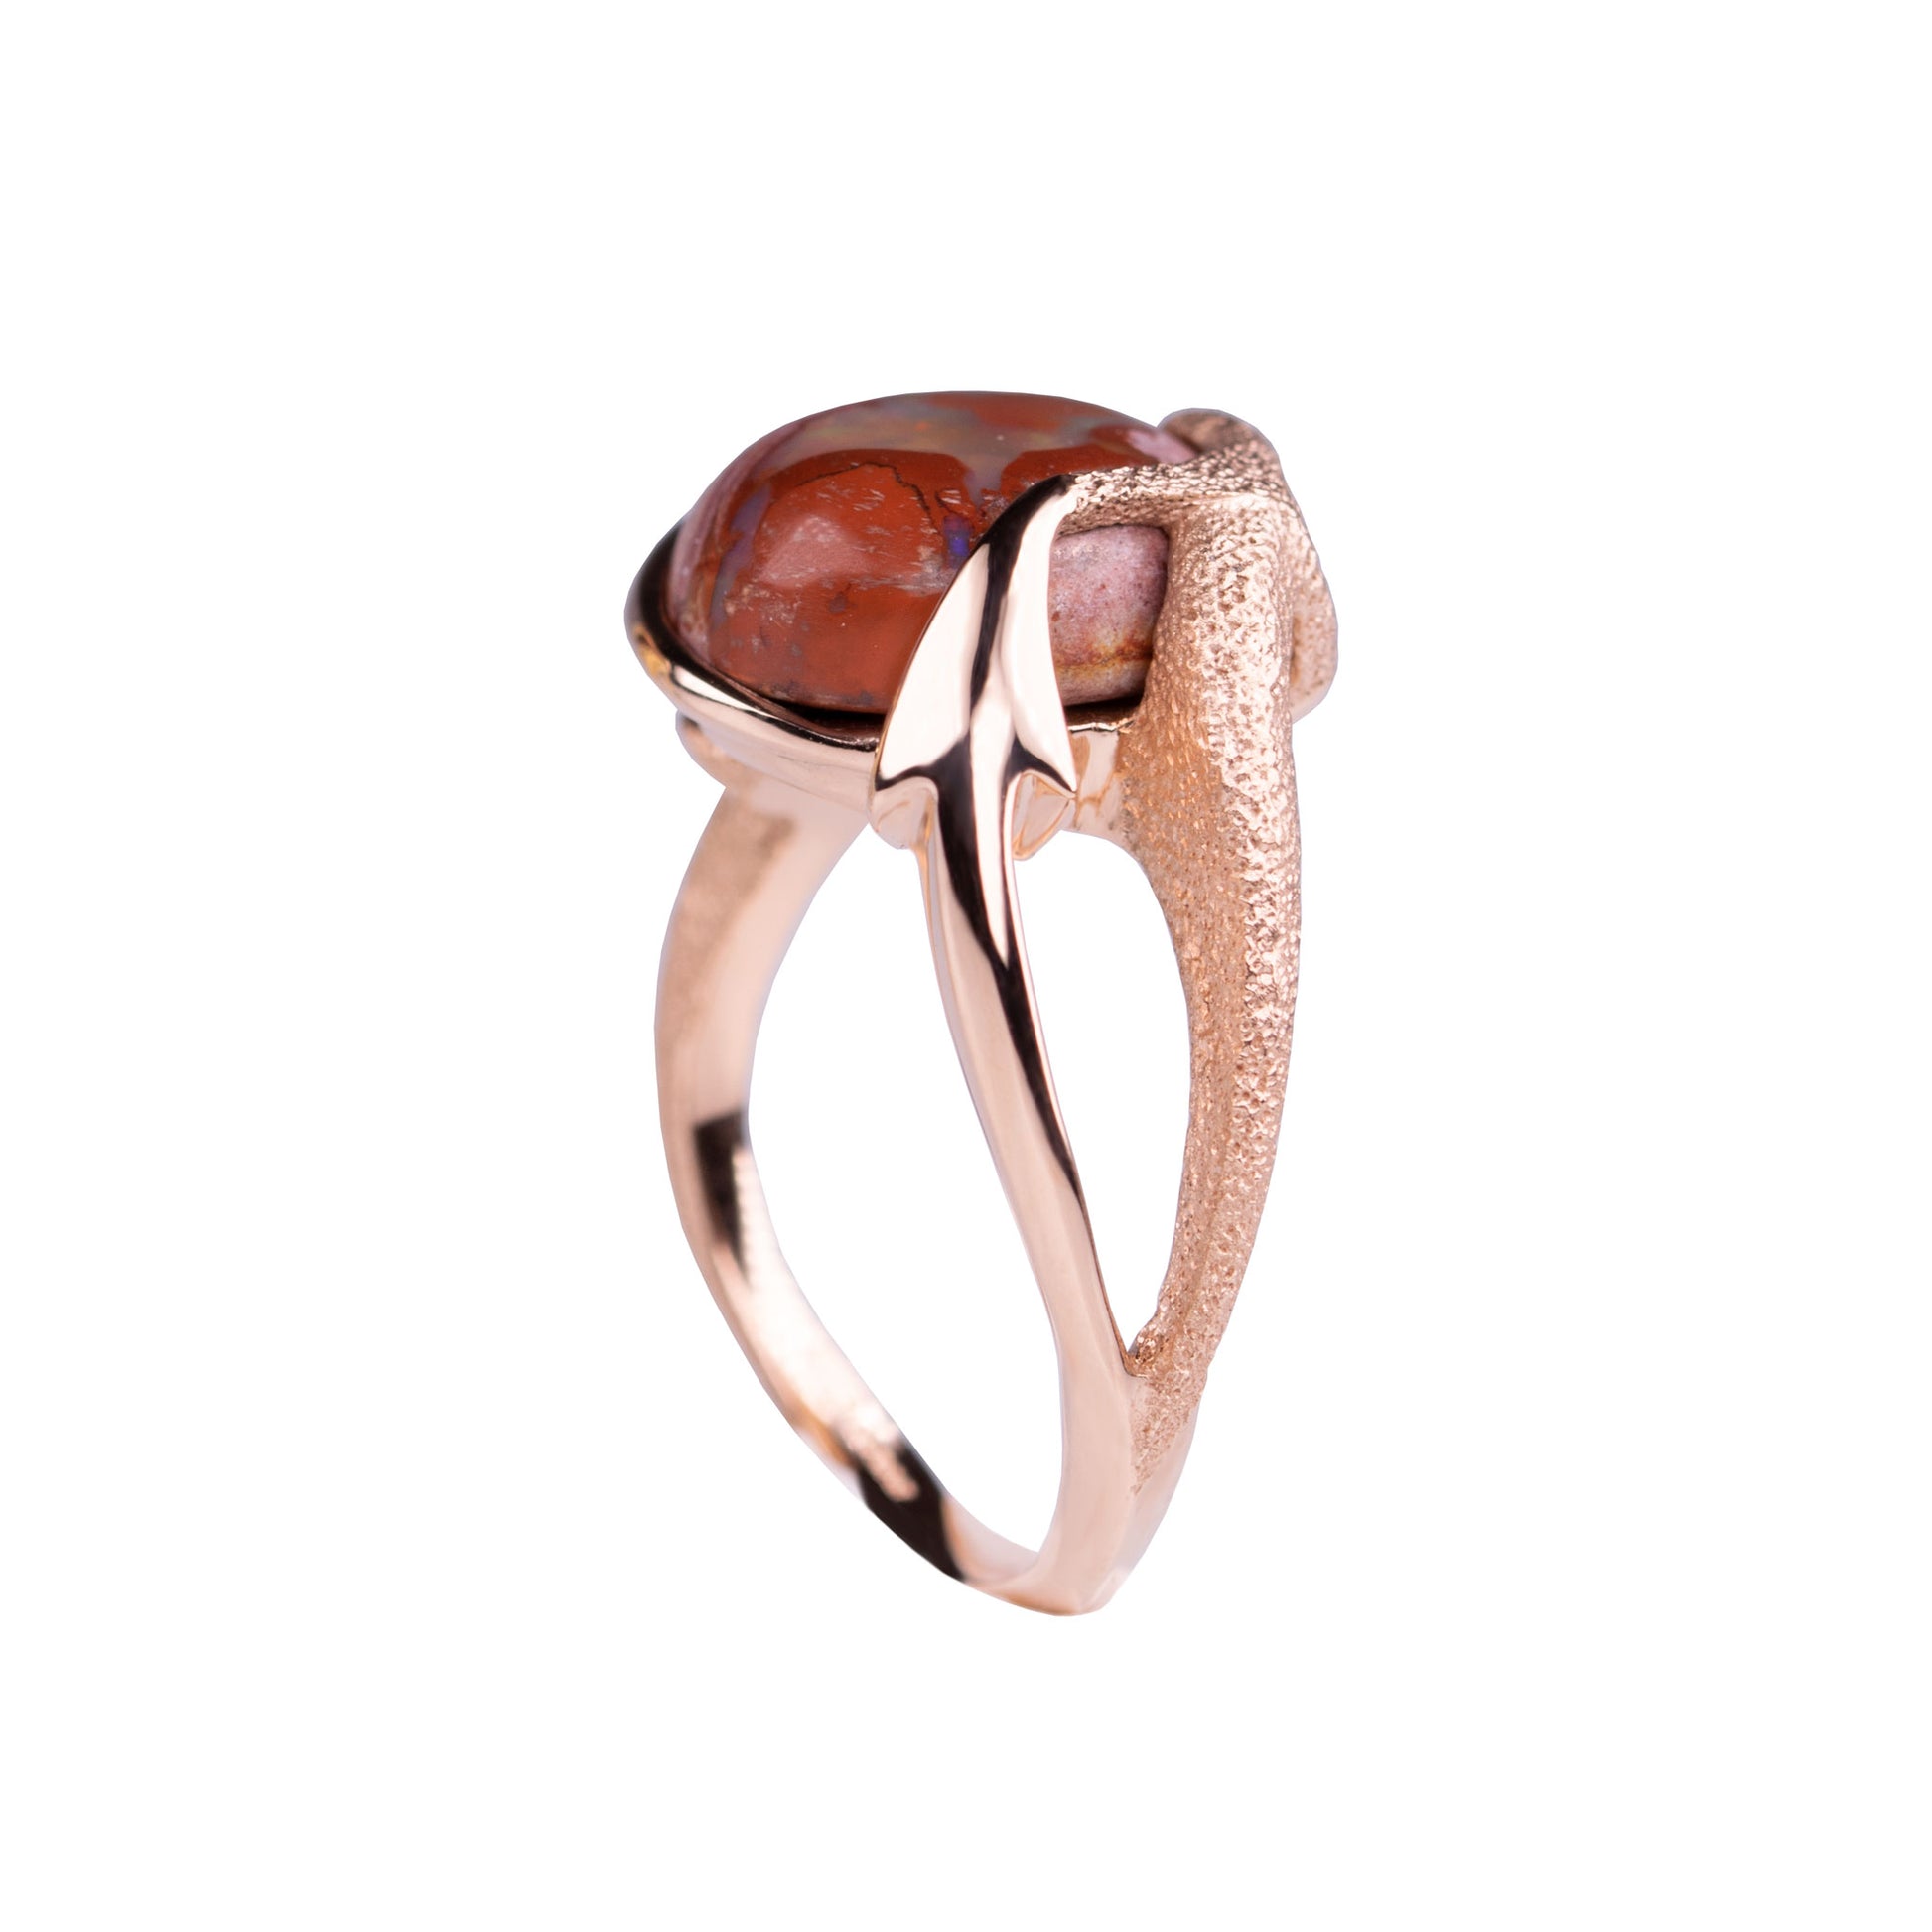 Orme-Brown Contemporary Fine Jewellery Ethical Arrow Statement Ring in sustainable recycled 18ct rose gold and a round Mexican fire opal (TipToe)